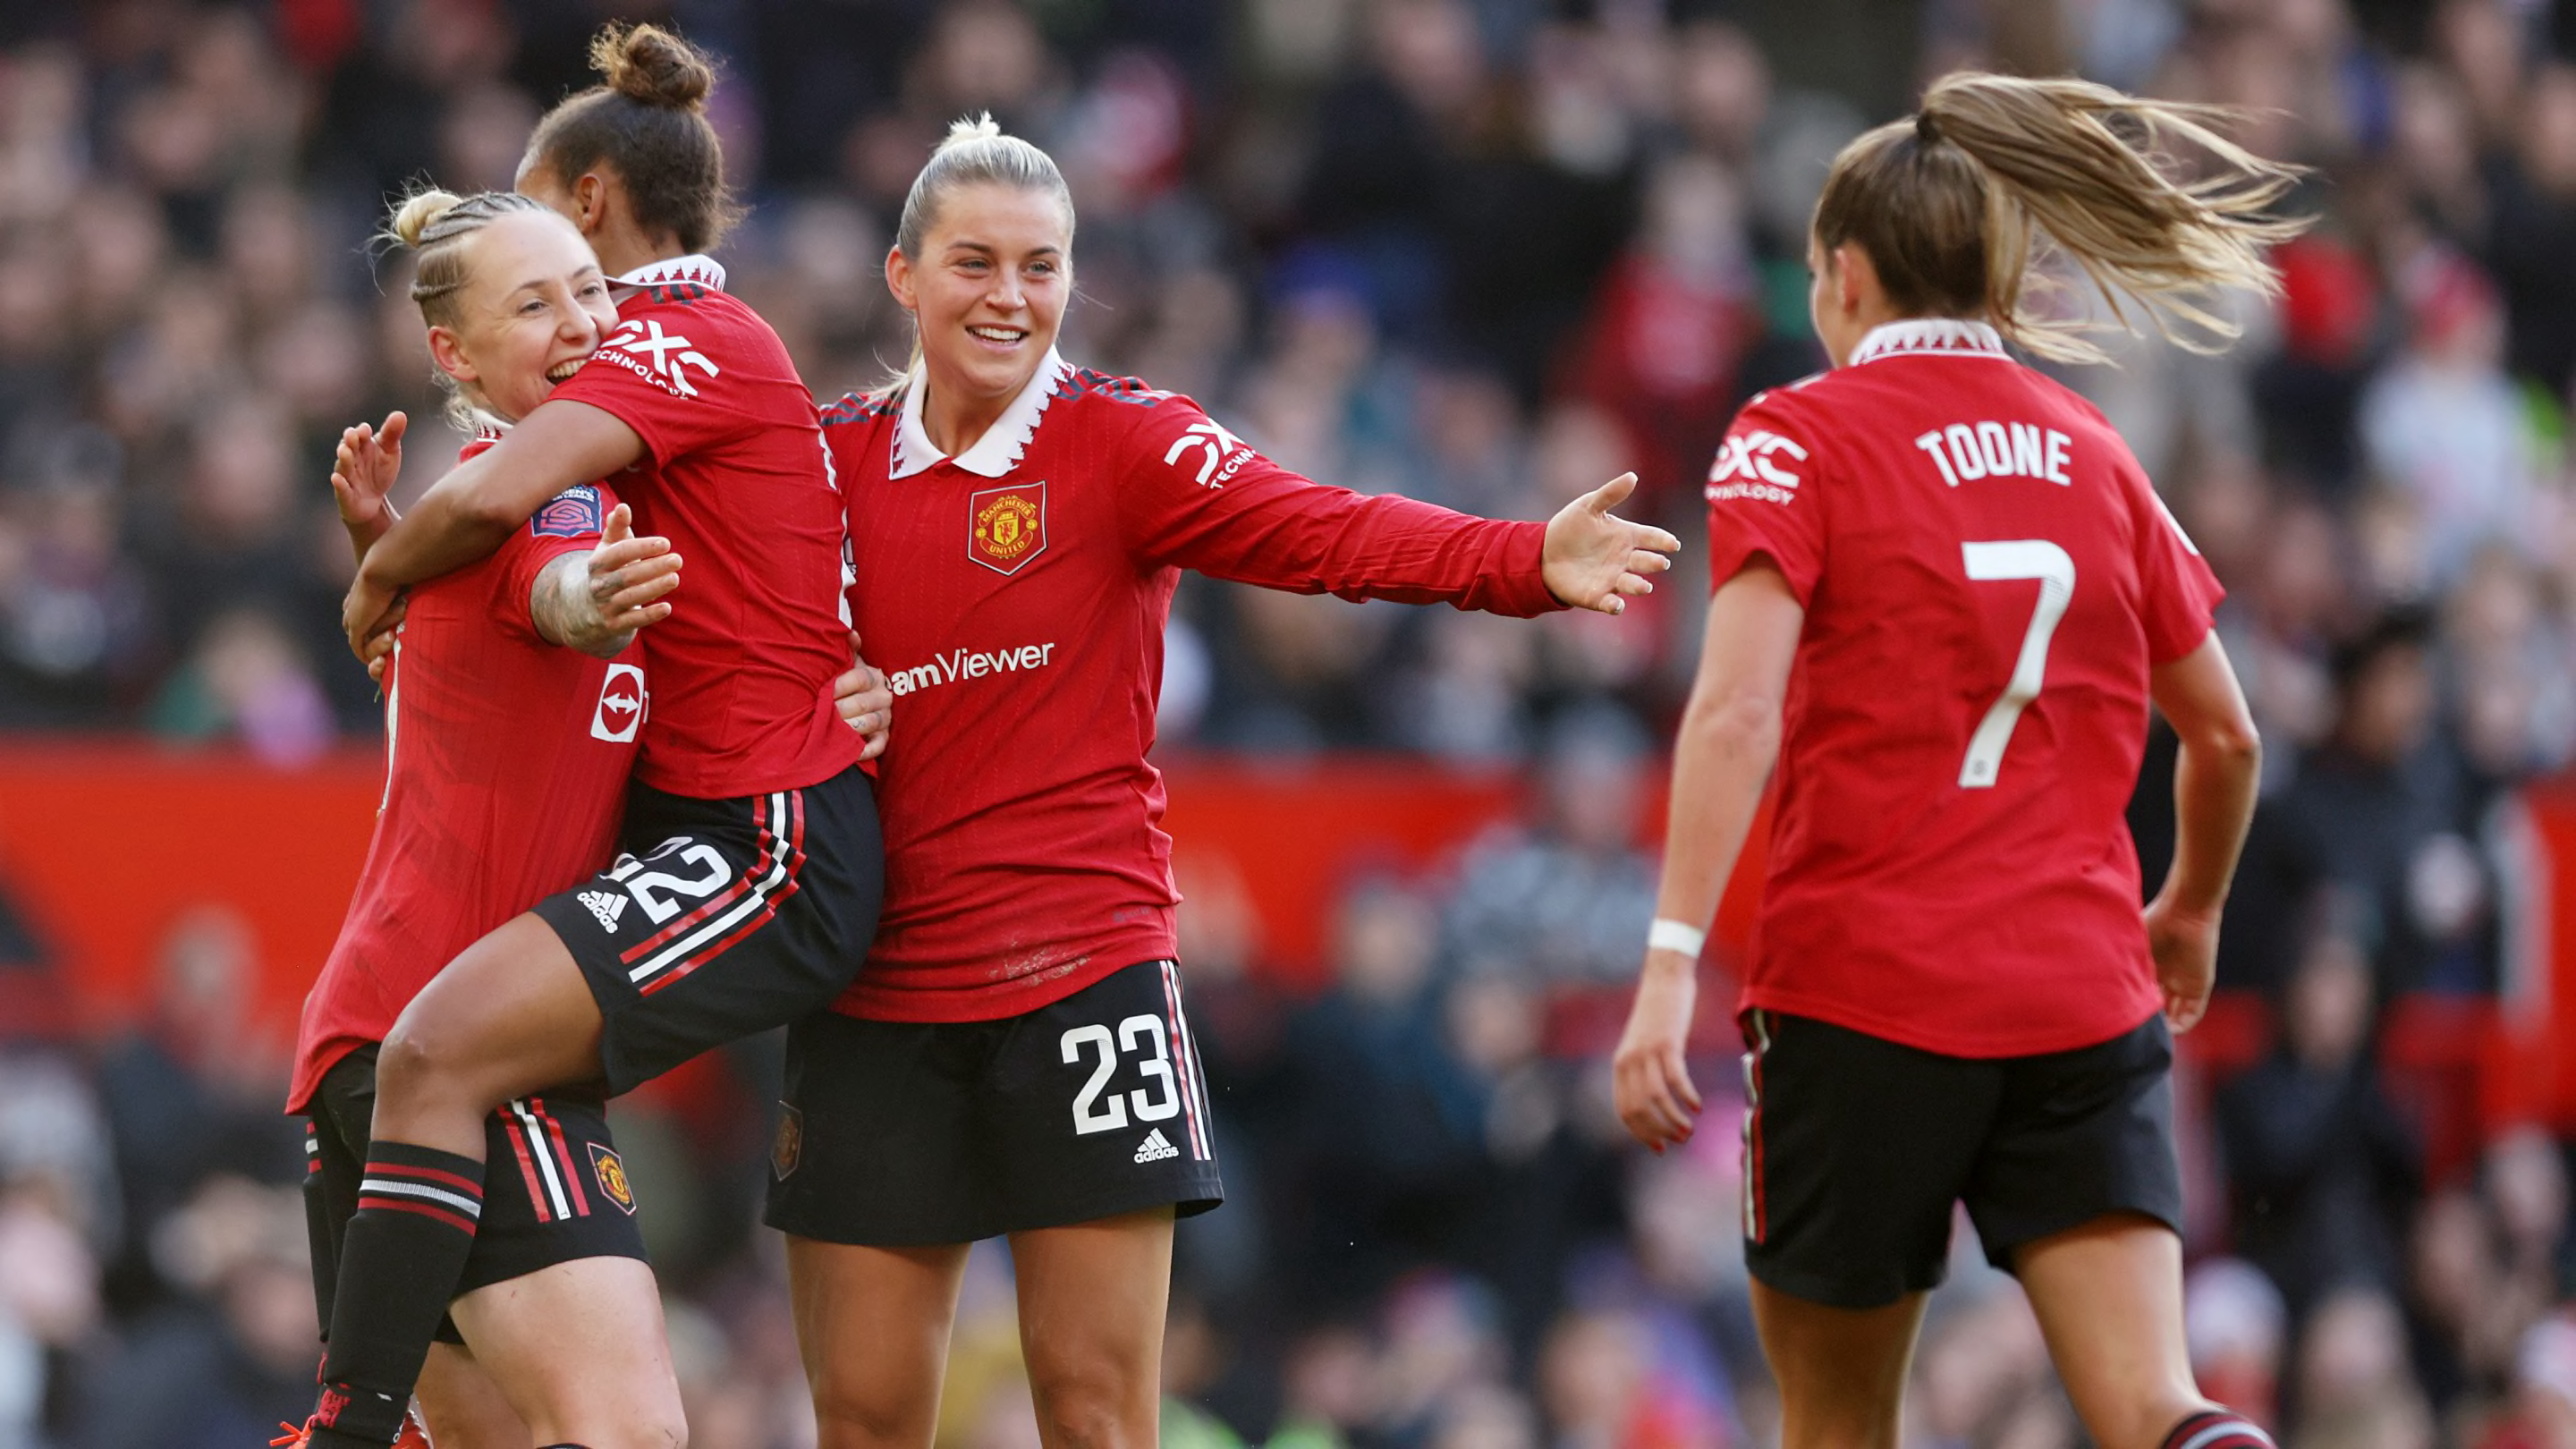 Man Utd 5-0 Aston Villa WSL: Player ratings as Red Devils cruise to thumping win